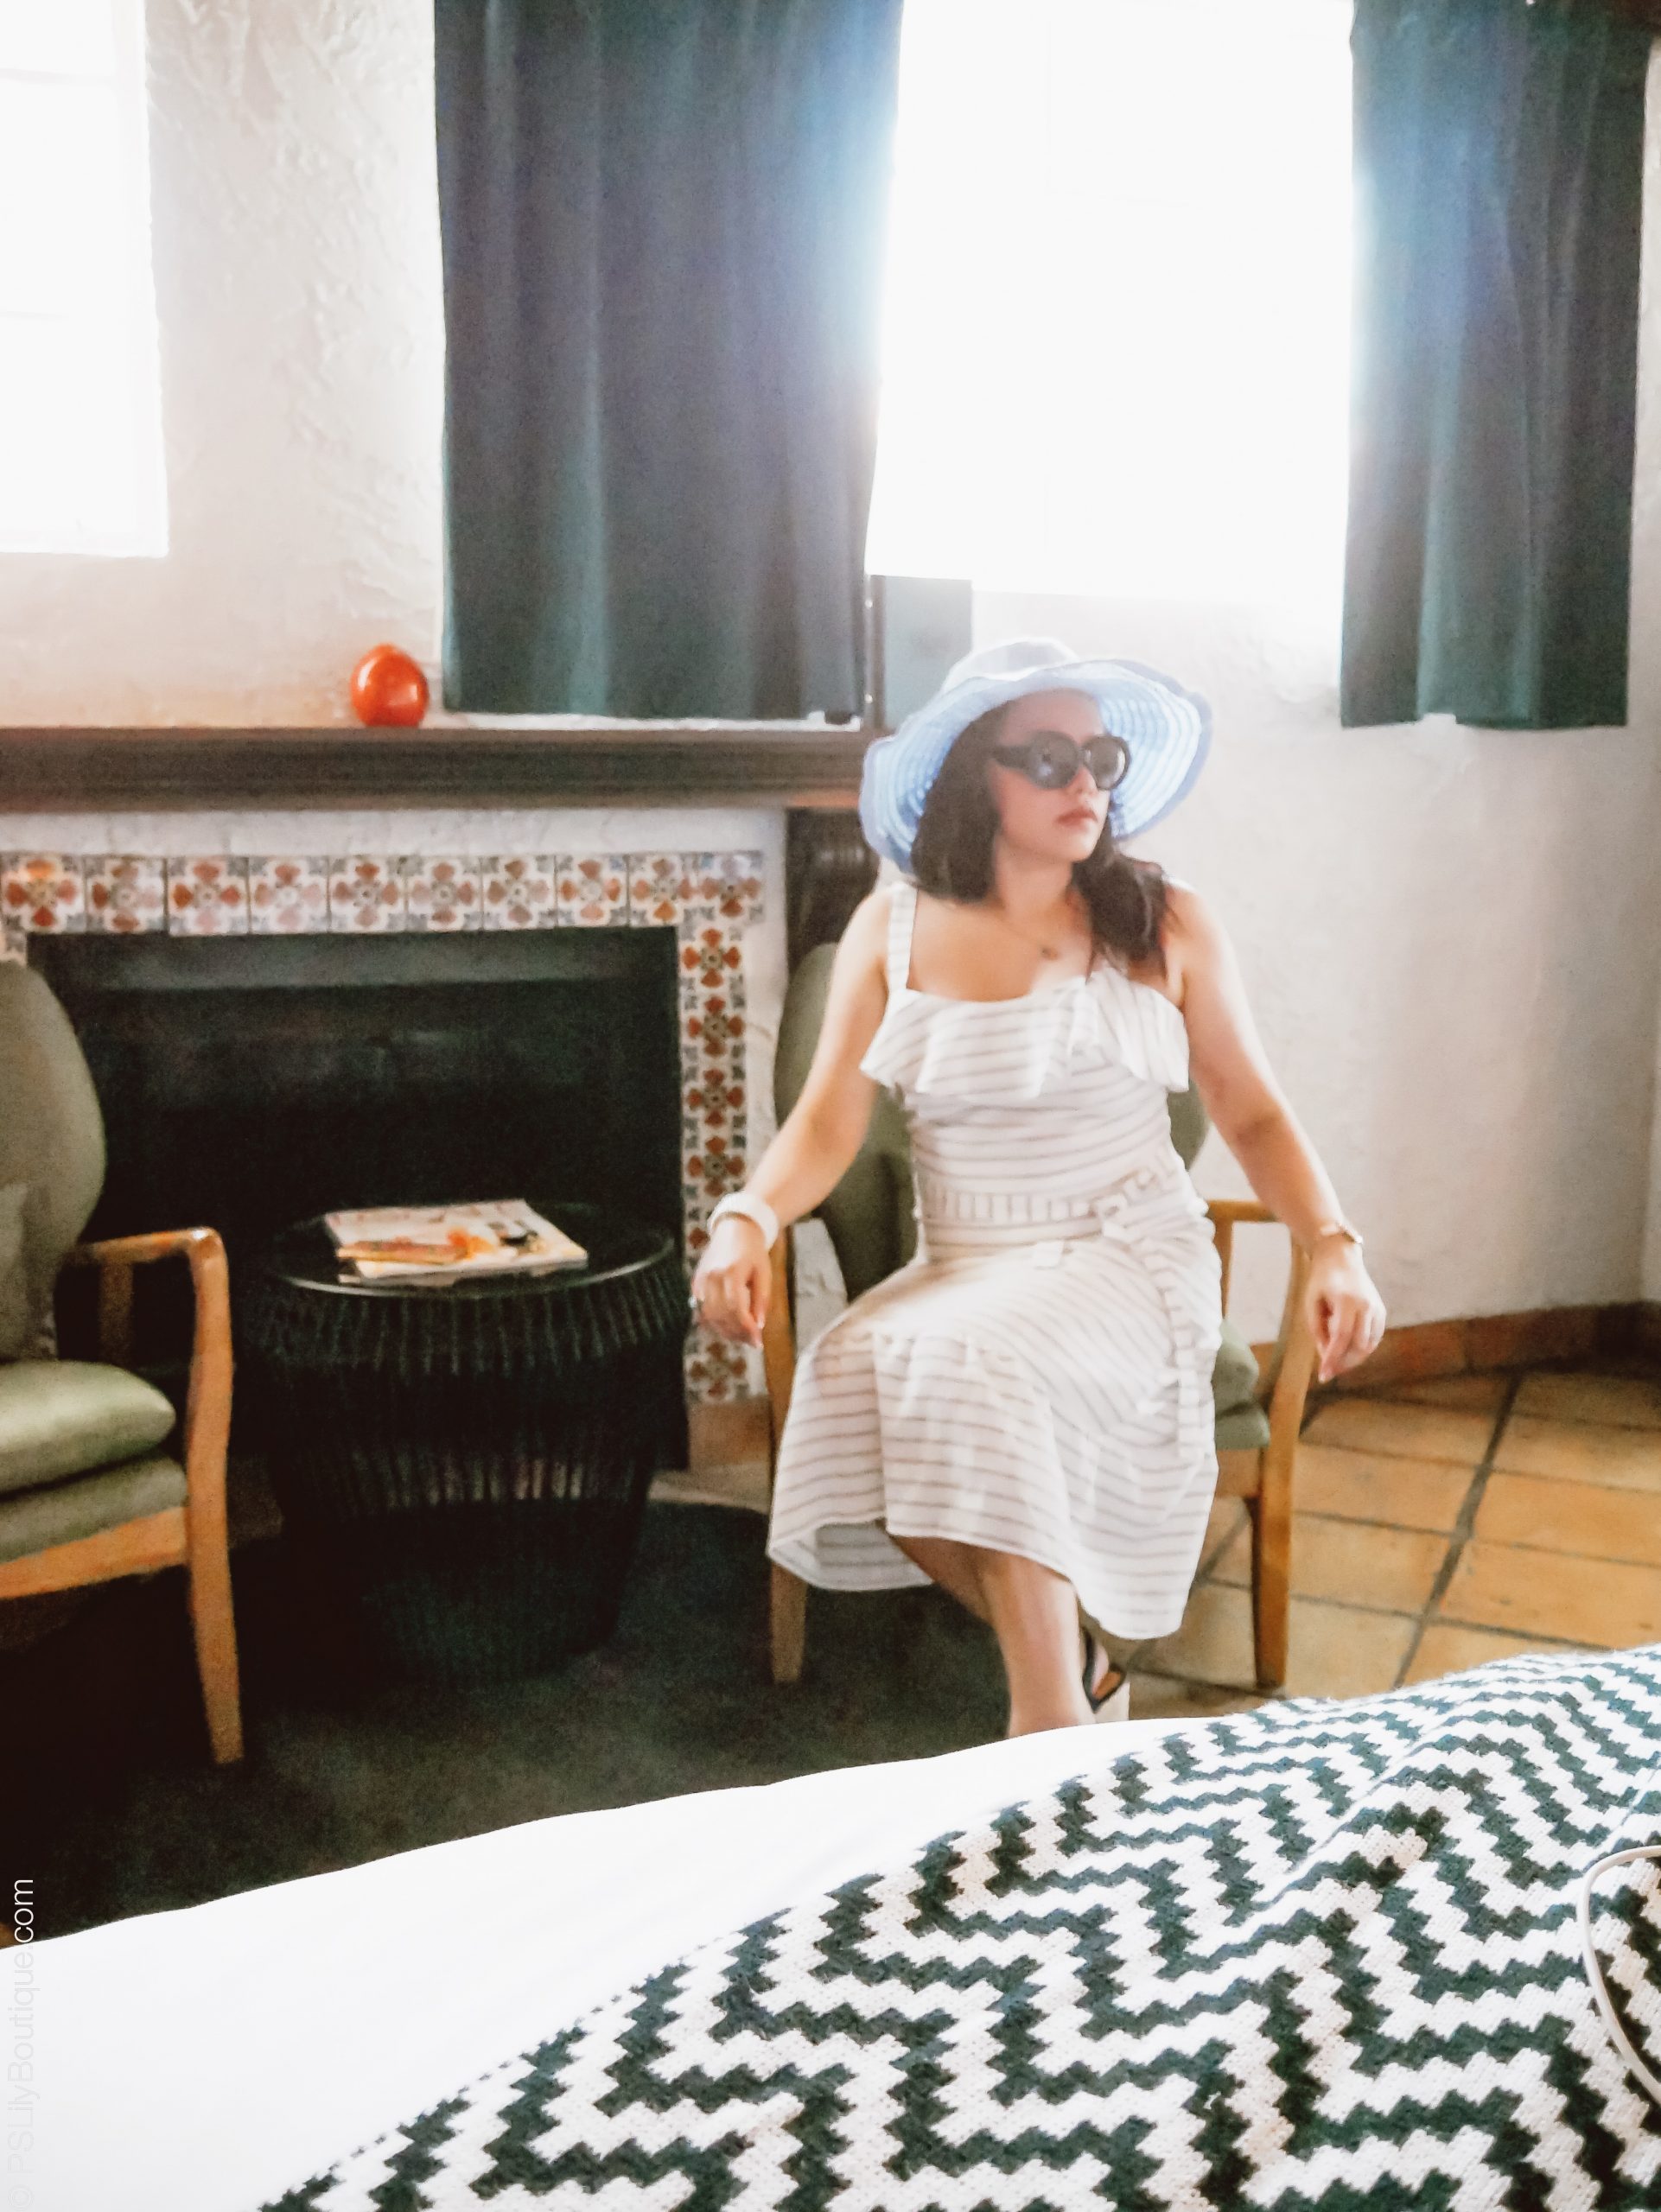 PSL_Palm_Springs-fireplace-chairs-table-dress-hat-sunglasses-shoes-1